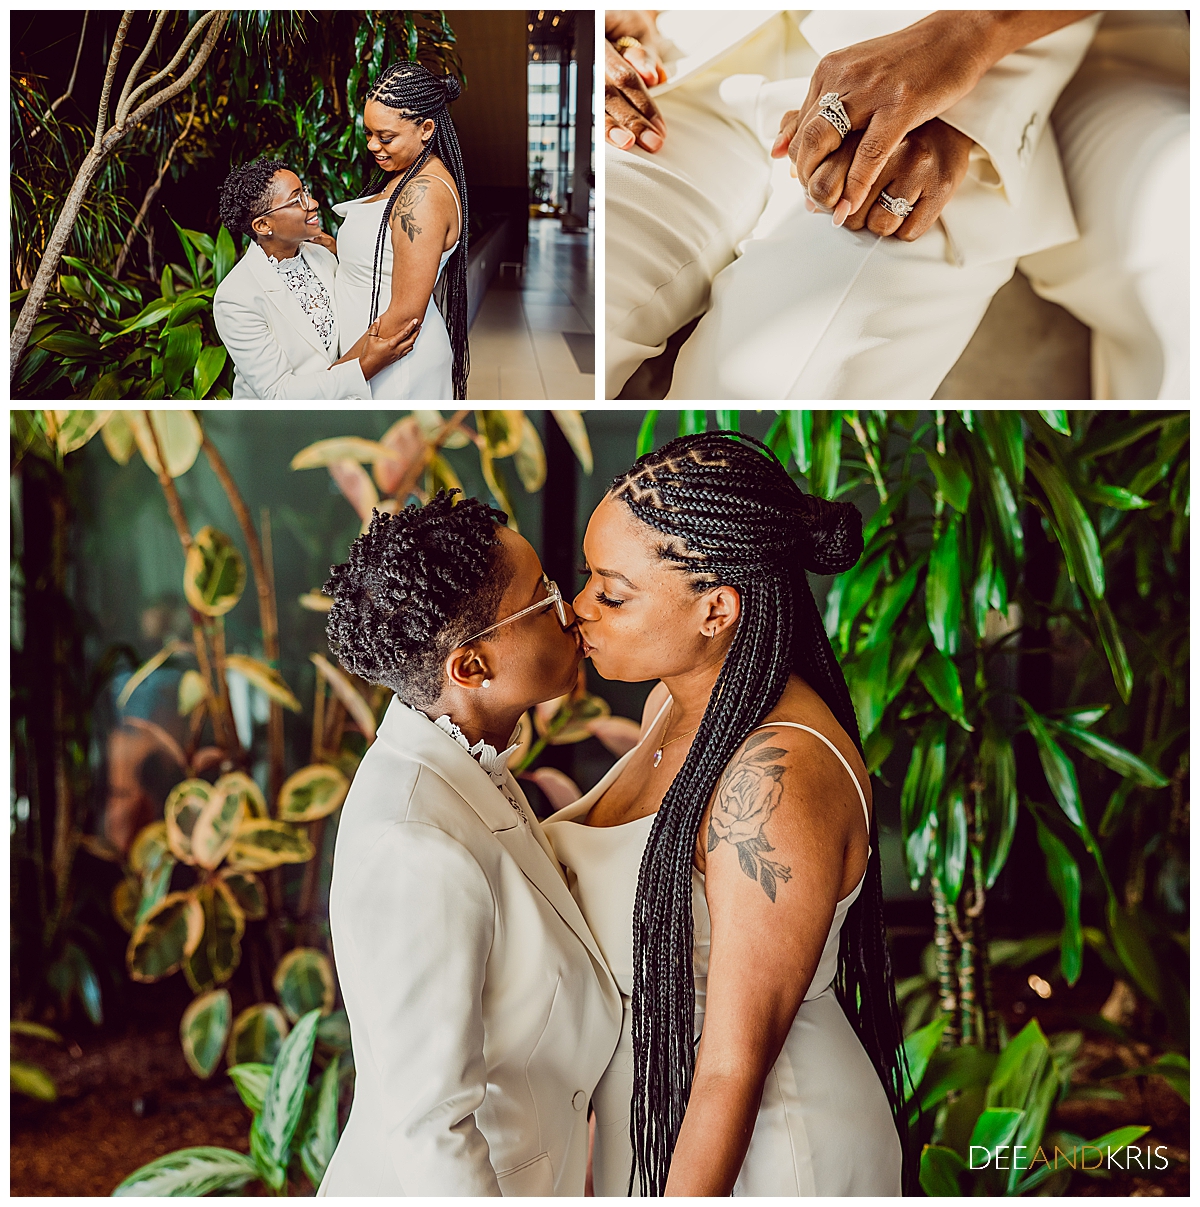 Three images: Top left image of first bride holding second bride. Top right image of brides hands  clasped together. Bottom image of couple kissing.